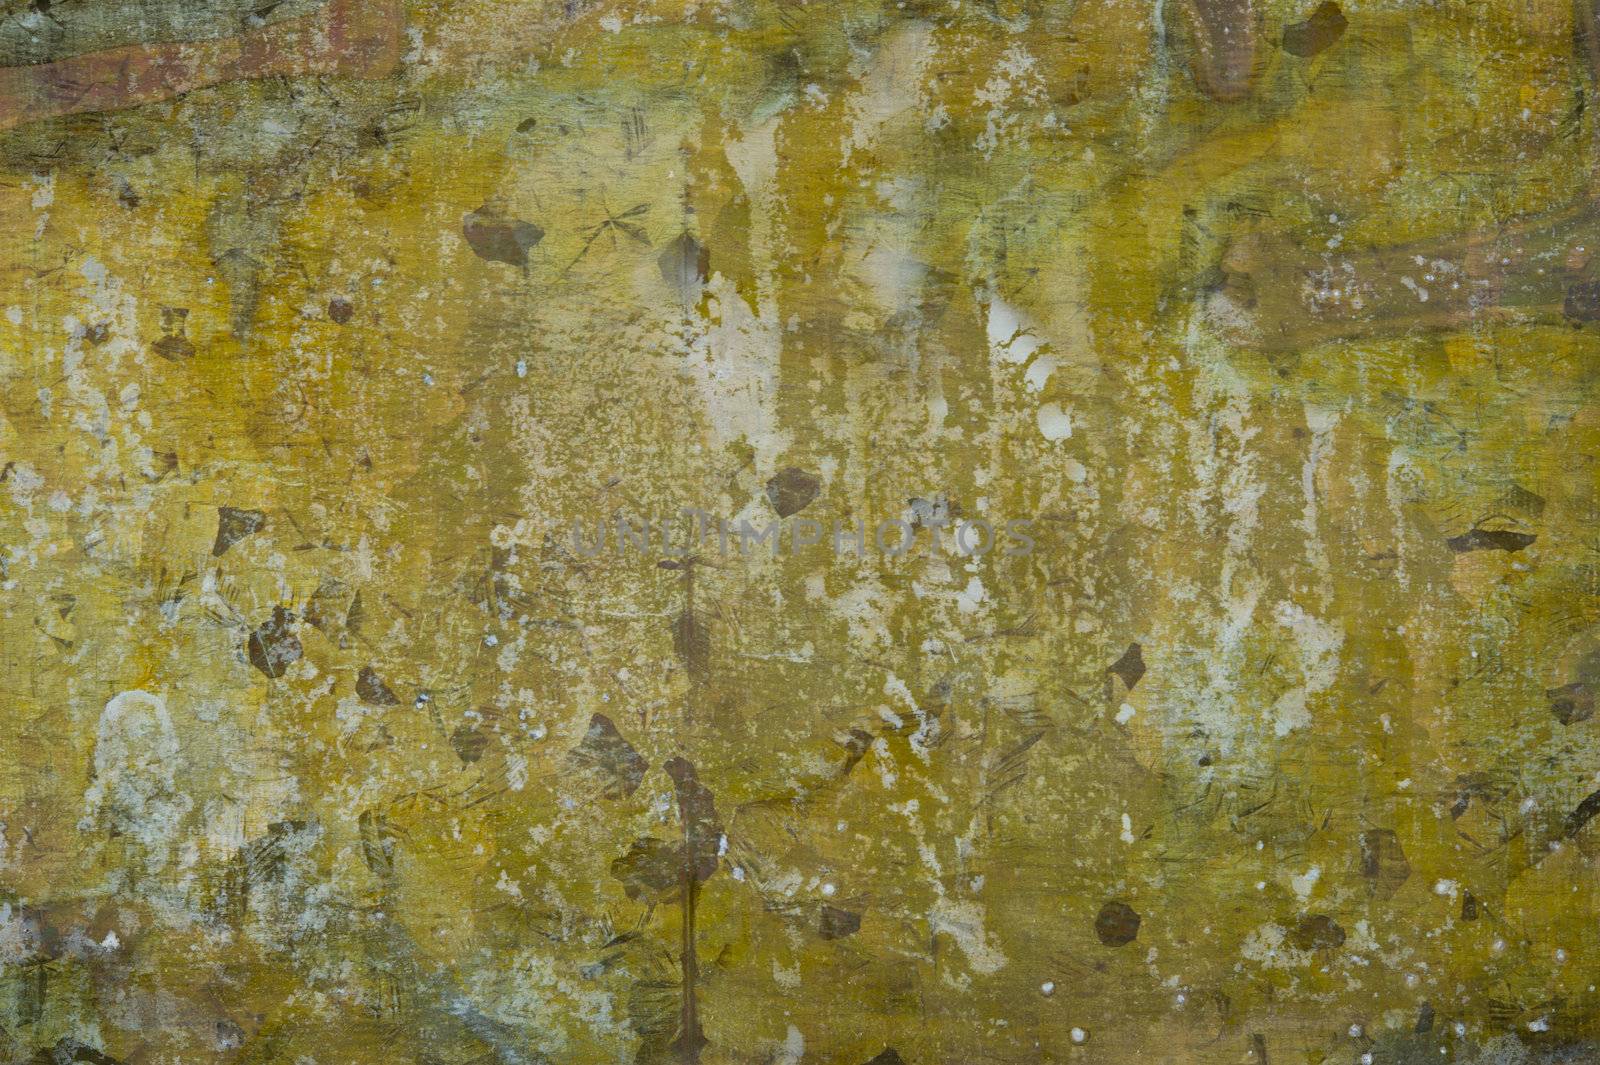 Image of old antiqued metal with a grunge type texture